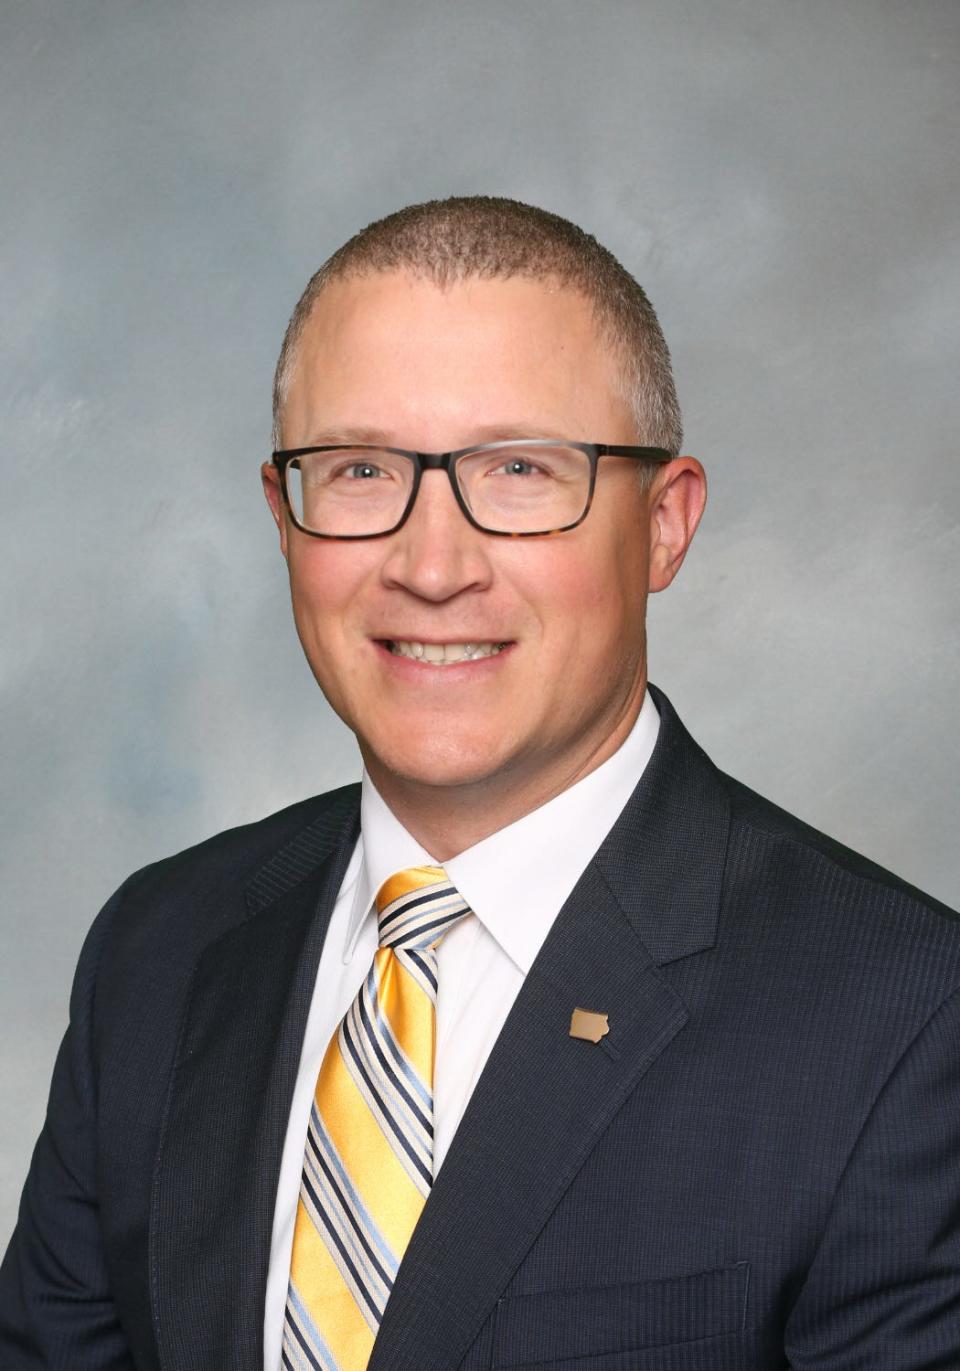 Grant Menke will become Iowa's next deputy agriculture secretary, replacing Julie Kenney, who is leaving for a new opportunity after nearly five years in the role.